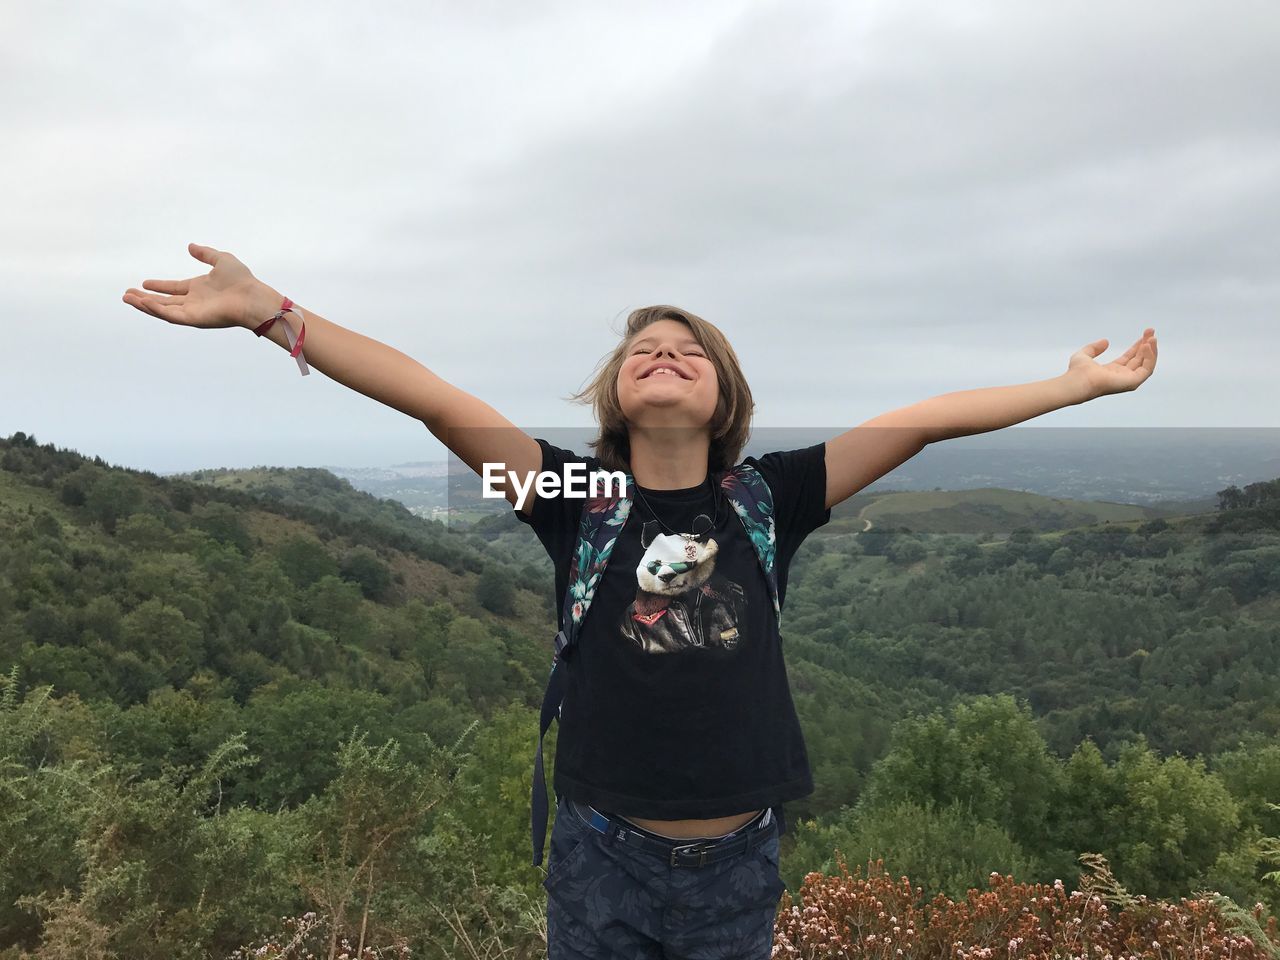 Carefree boy with arms outstretched standing on mountain against sky